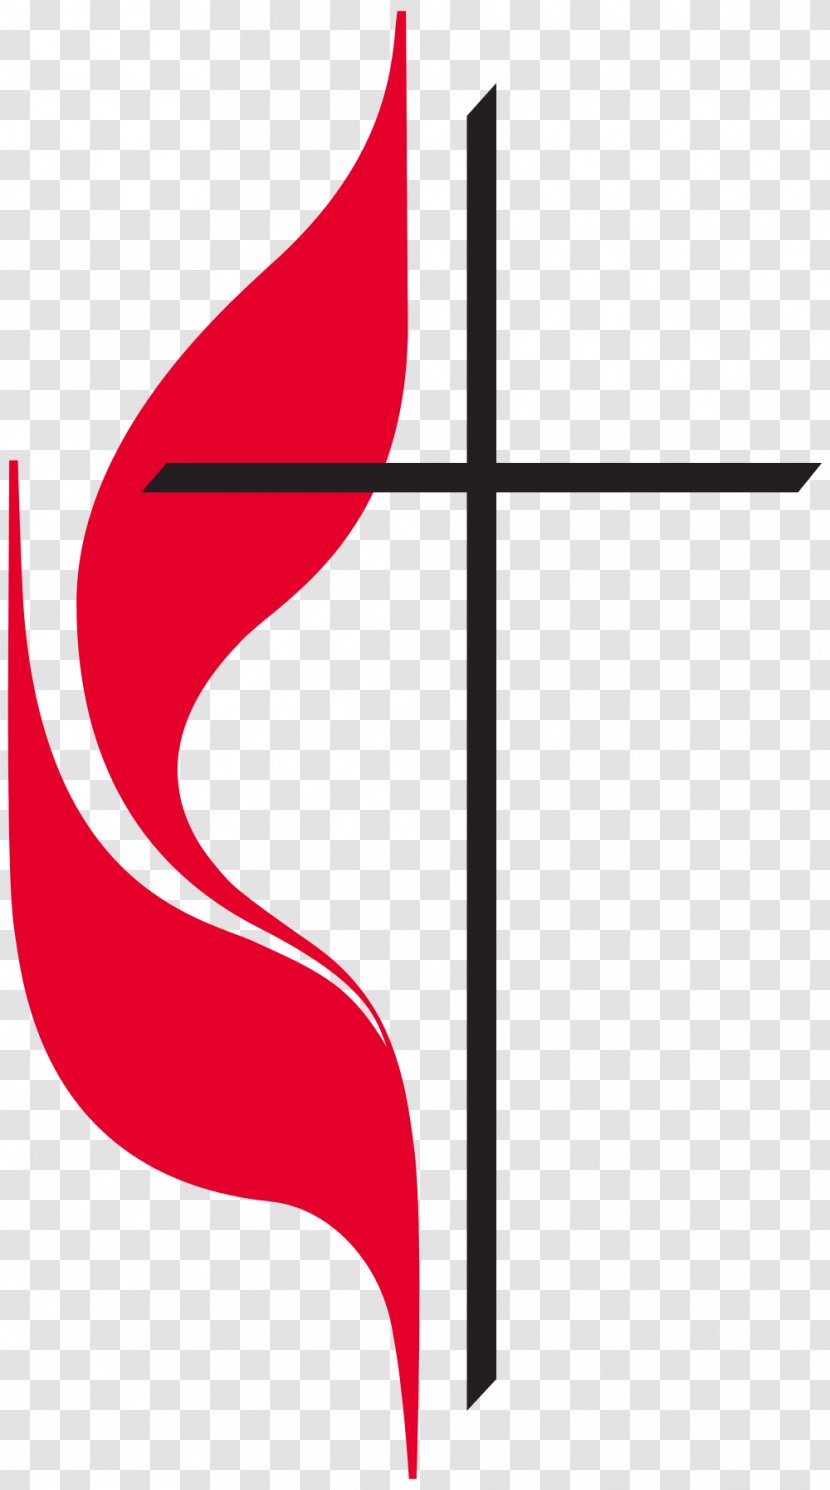 Orchard Park United Methodist Church Cross And Flame Methodism - Evangelical Brethren Transparent PNG